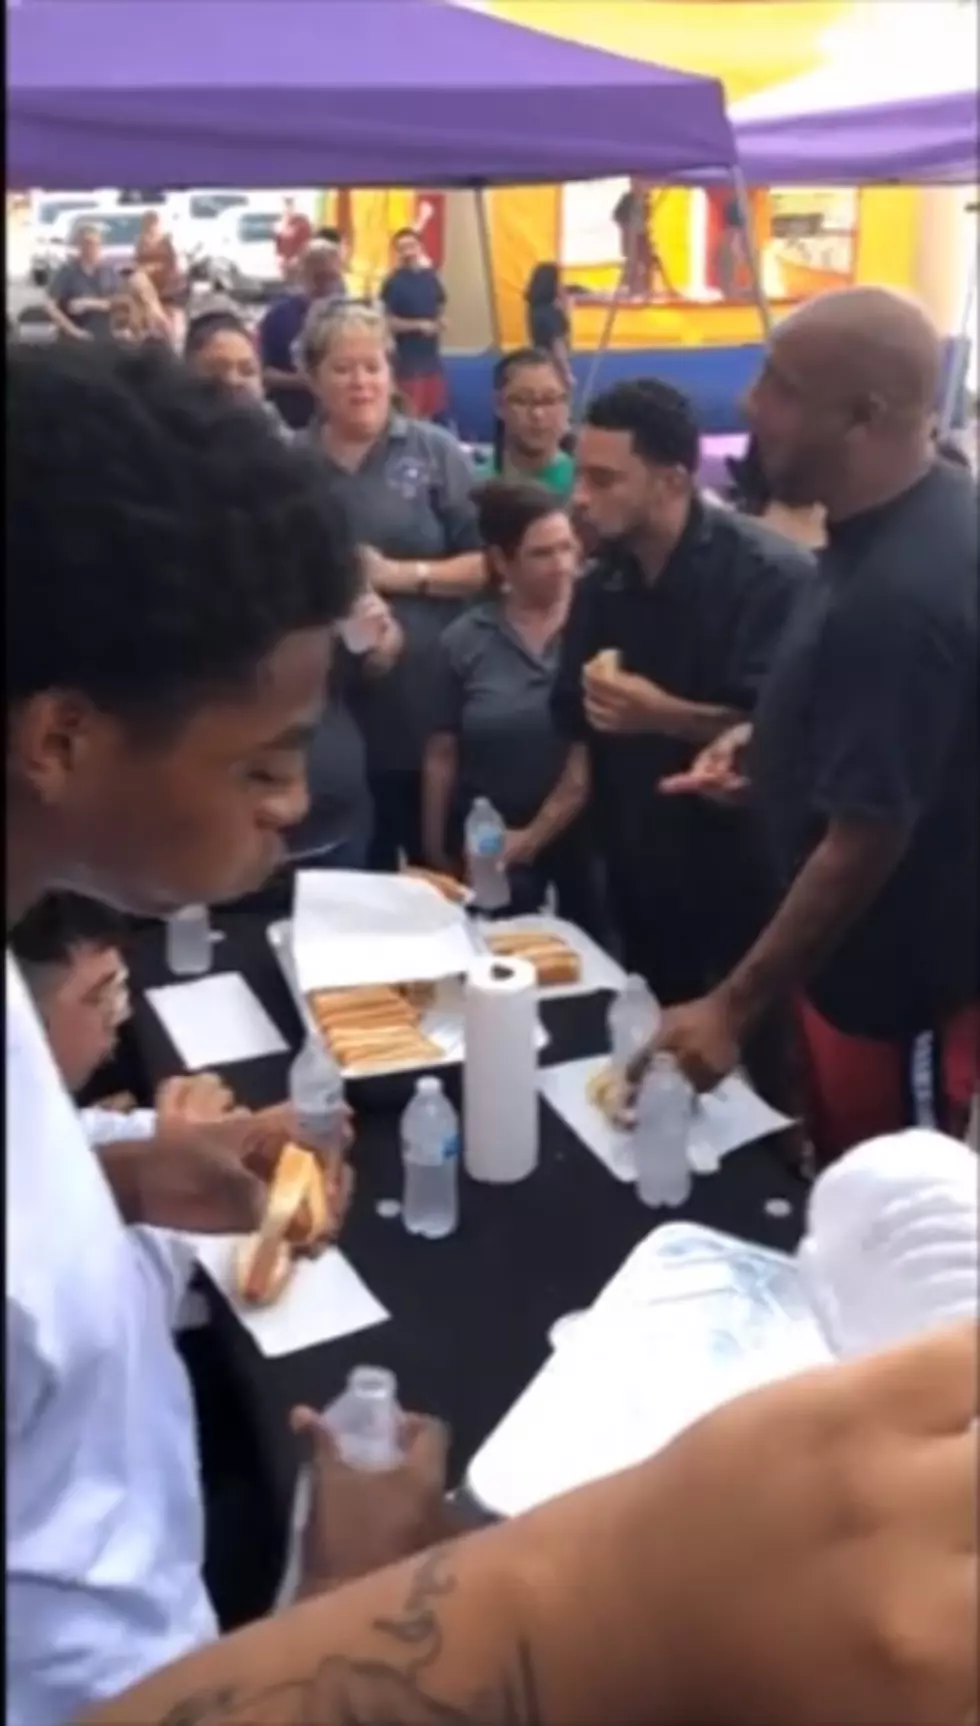 Hot Dog eating contest in Killeen at Familia Ink Tattoos [VIDEO]